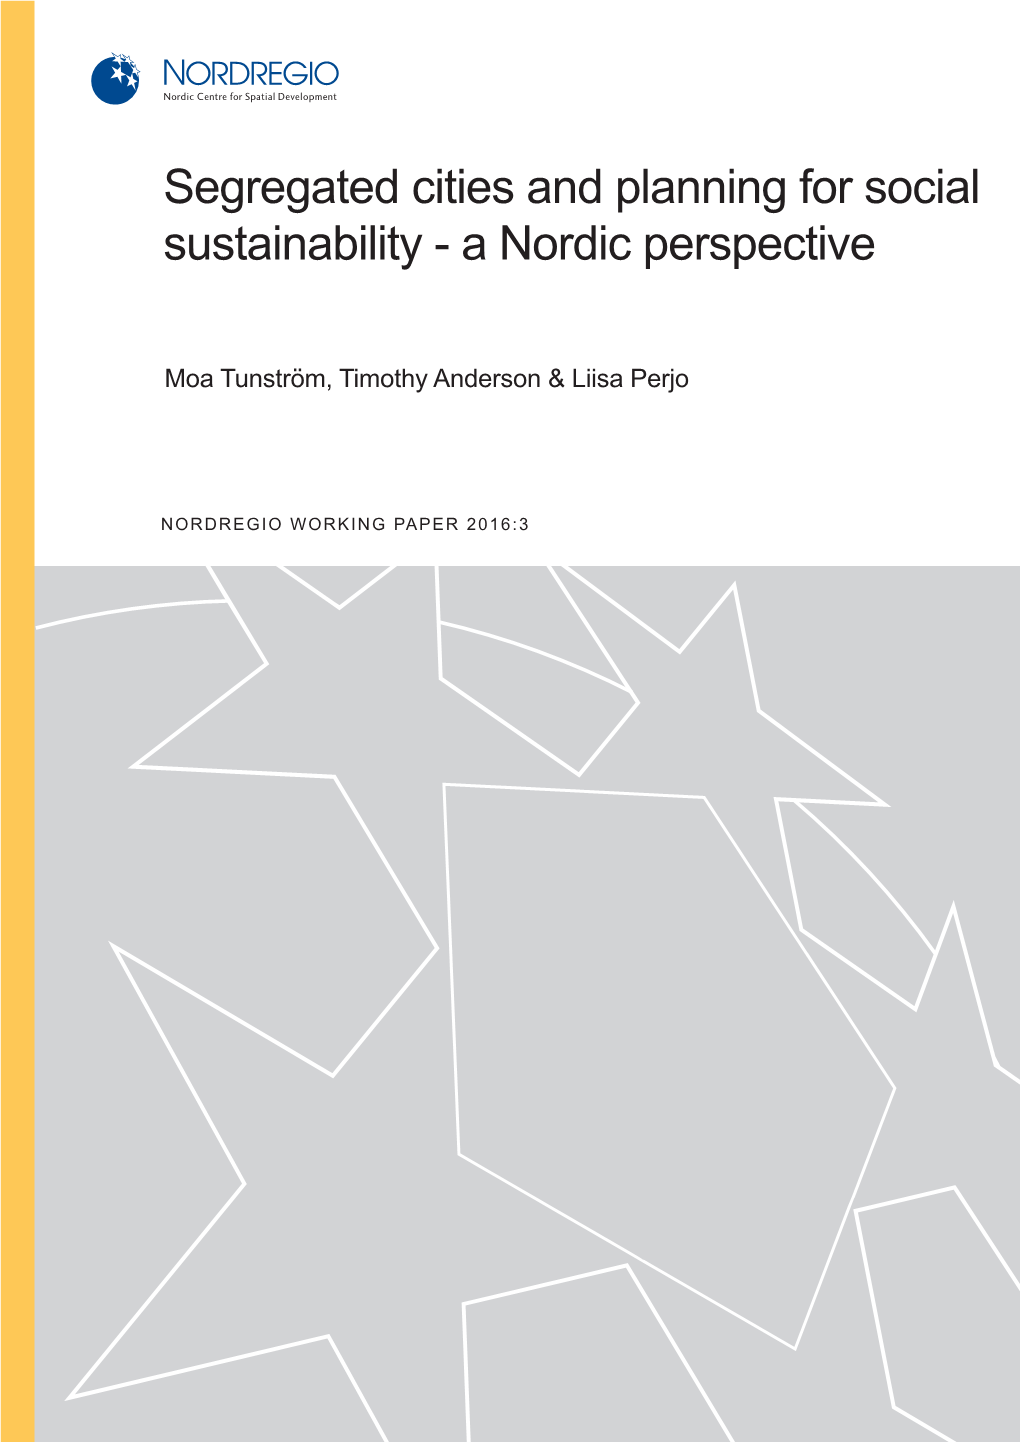 Segregated Cities and Planning for Social Sustainability - a Nordic Perspective